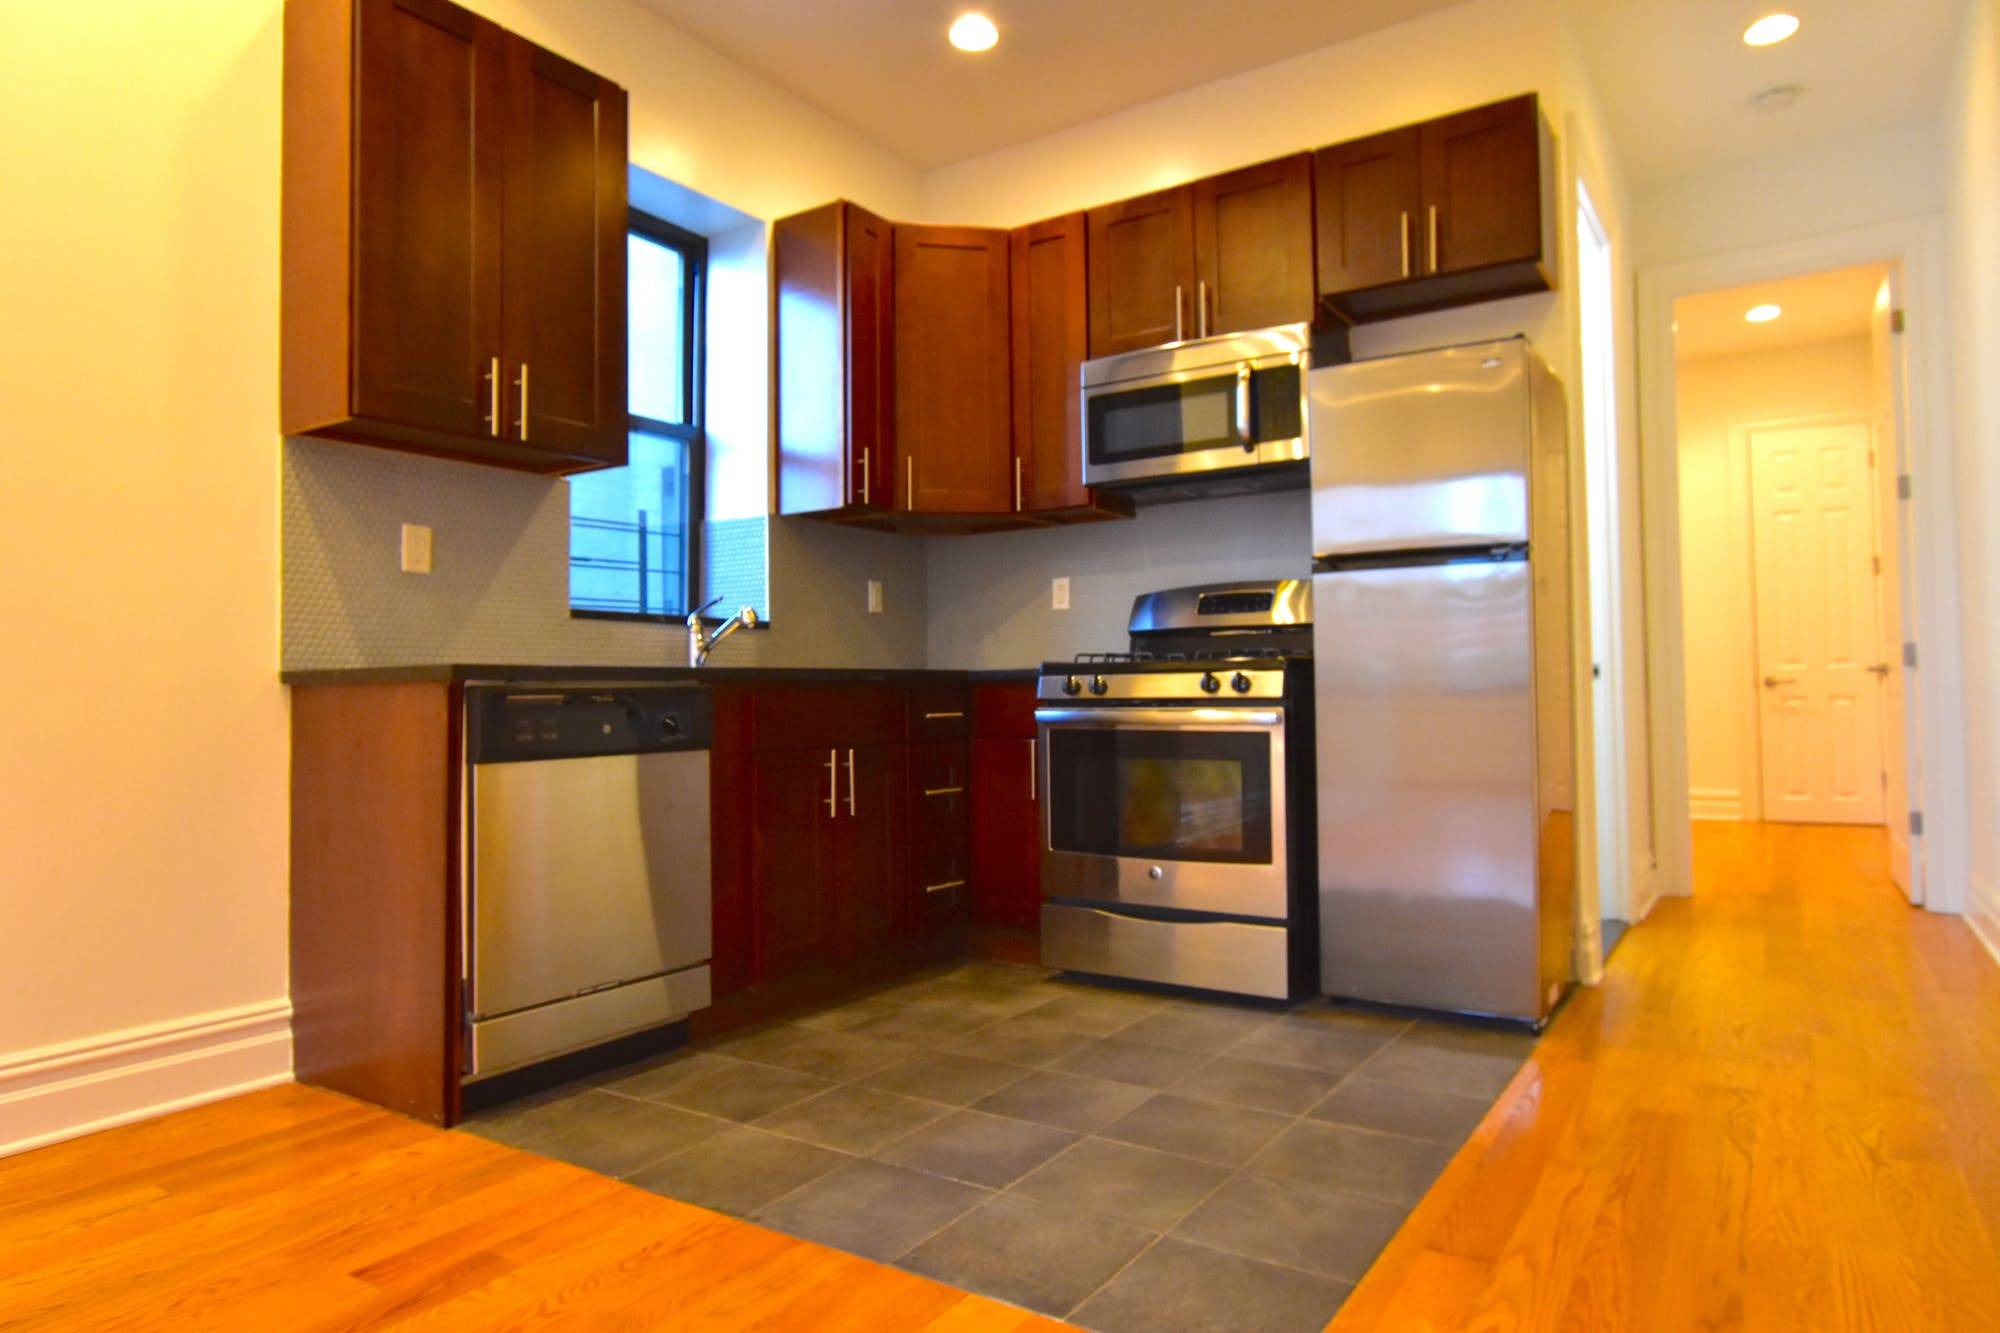 Available 2 Bedroom, 1 Bathroom Concessions No fee 1 Month Free Apartment Features Renovated Stainless steel appliances Hardwood floors Tons of natural light Washer Dryer in unit Dishwasher Recessed lighting ...